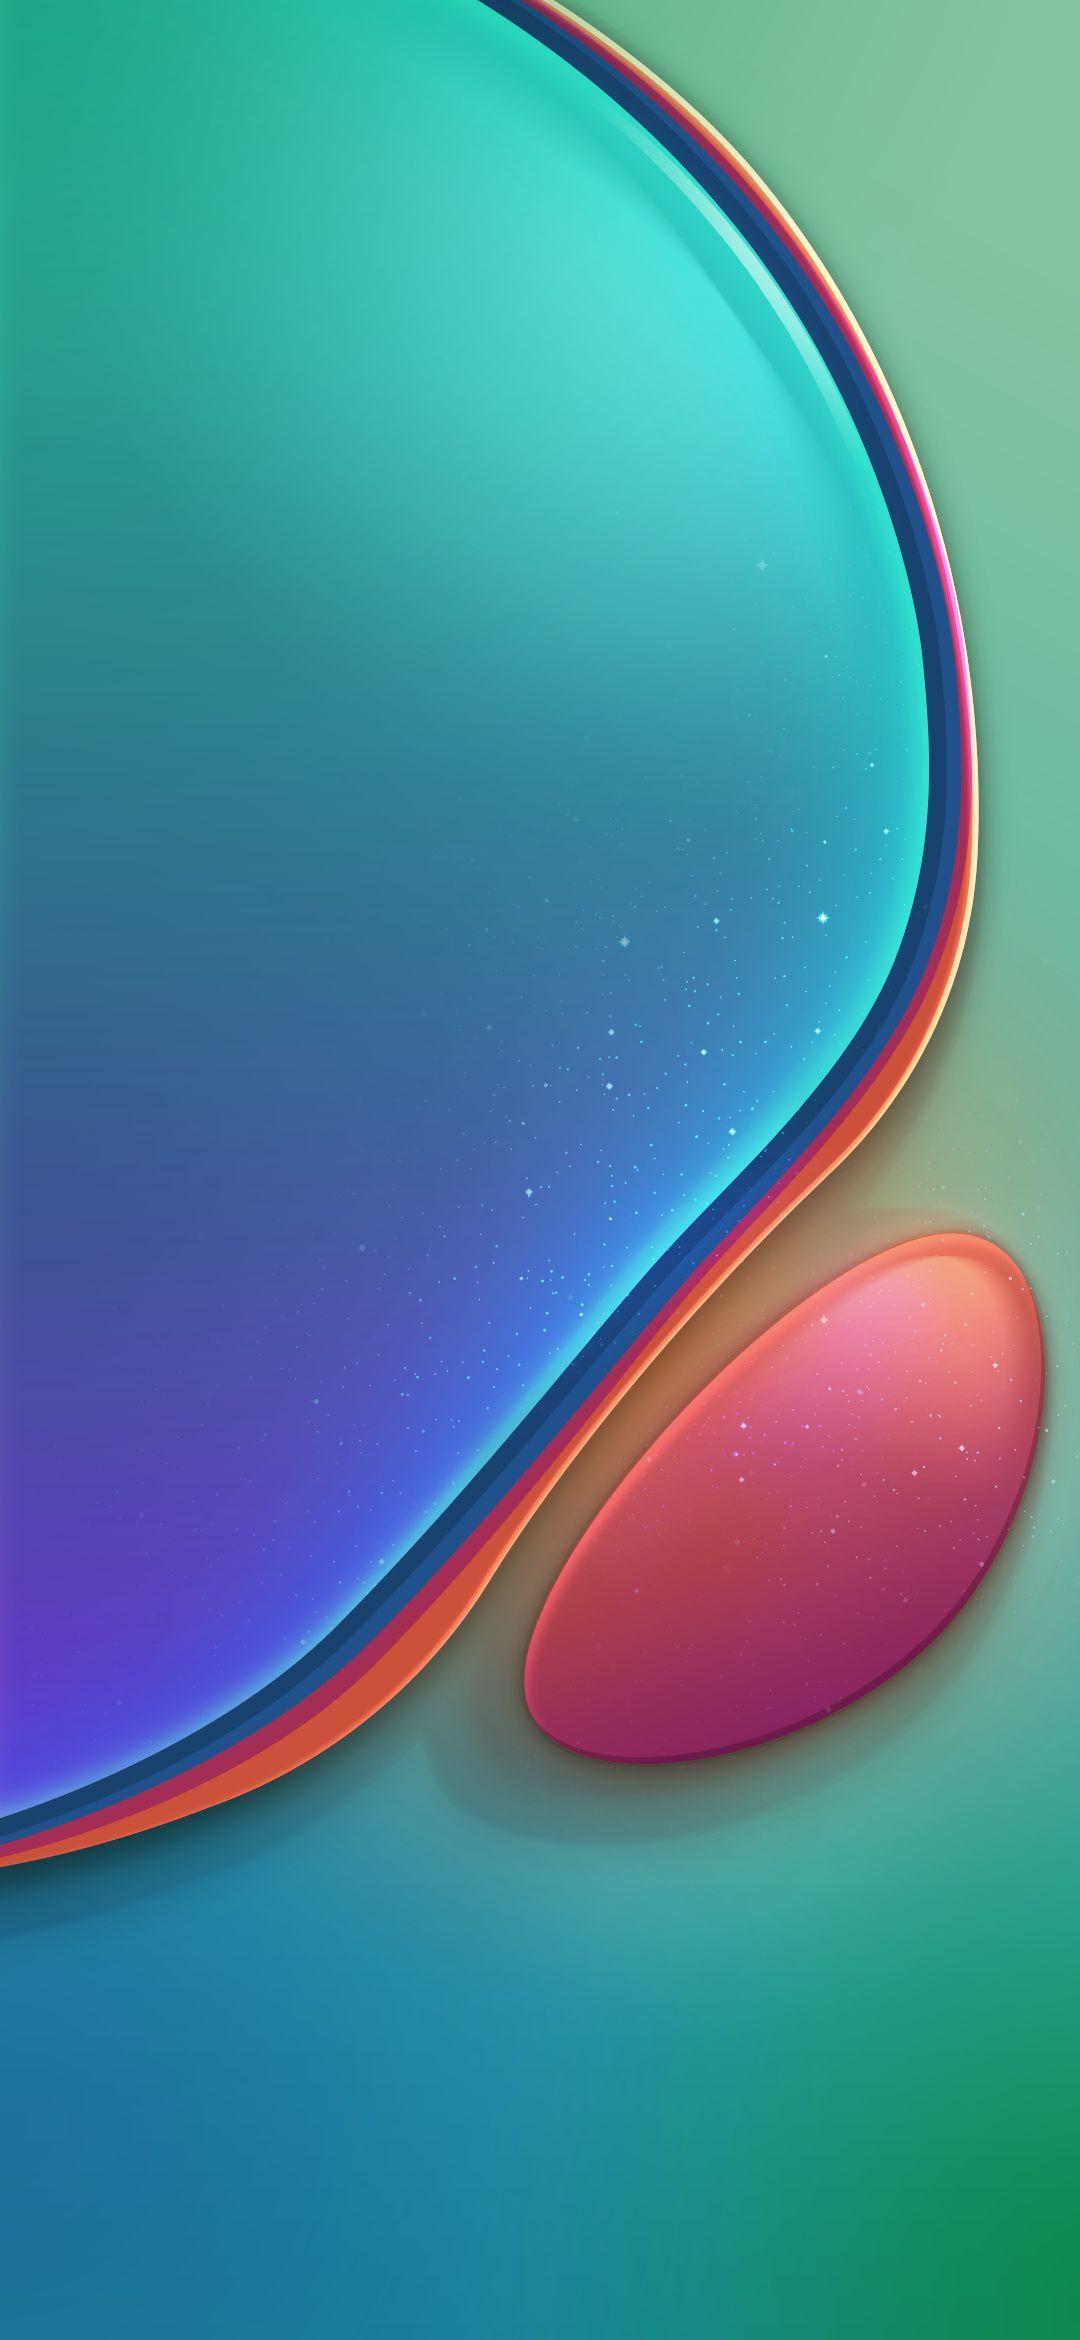 1080 x 2340 · jpeg - iPhone11 Color gradient smooth visual Wallpaper | Hd phone wallpapers ...